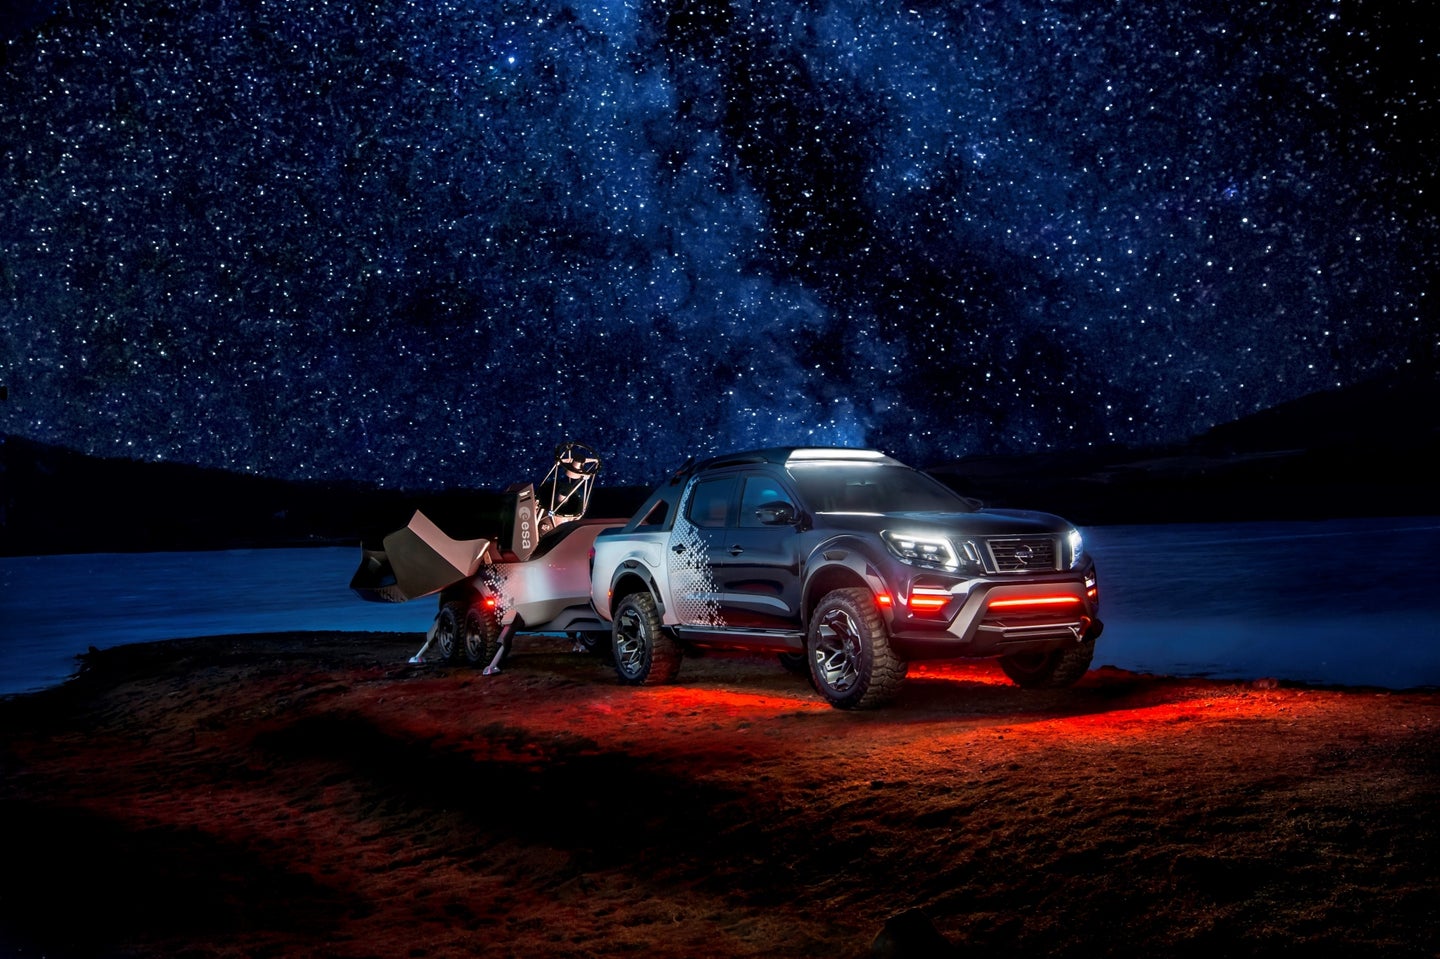 Newly Unveiled Nissan Navara Dark Sky Concept is a Mobile Space Observatory - Front Side View - Night View - Telescope In Operation